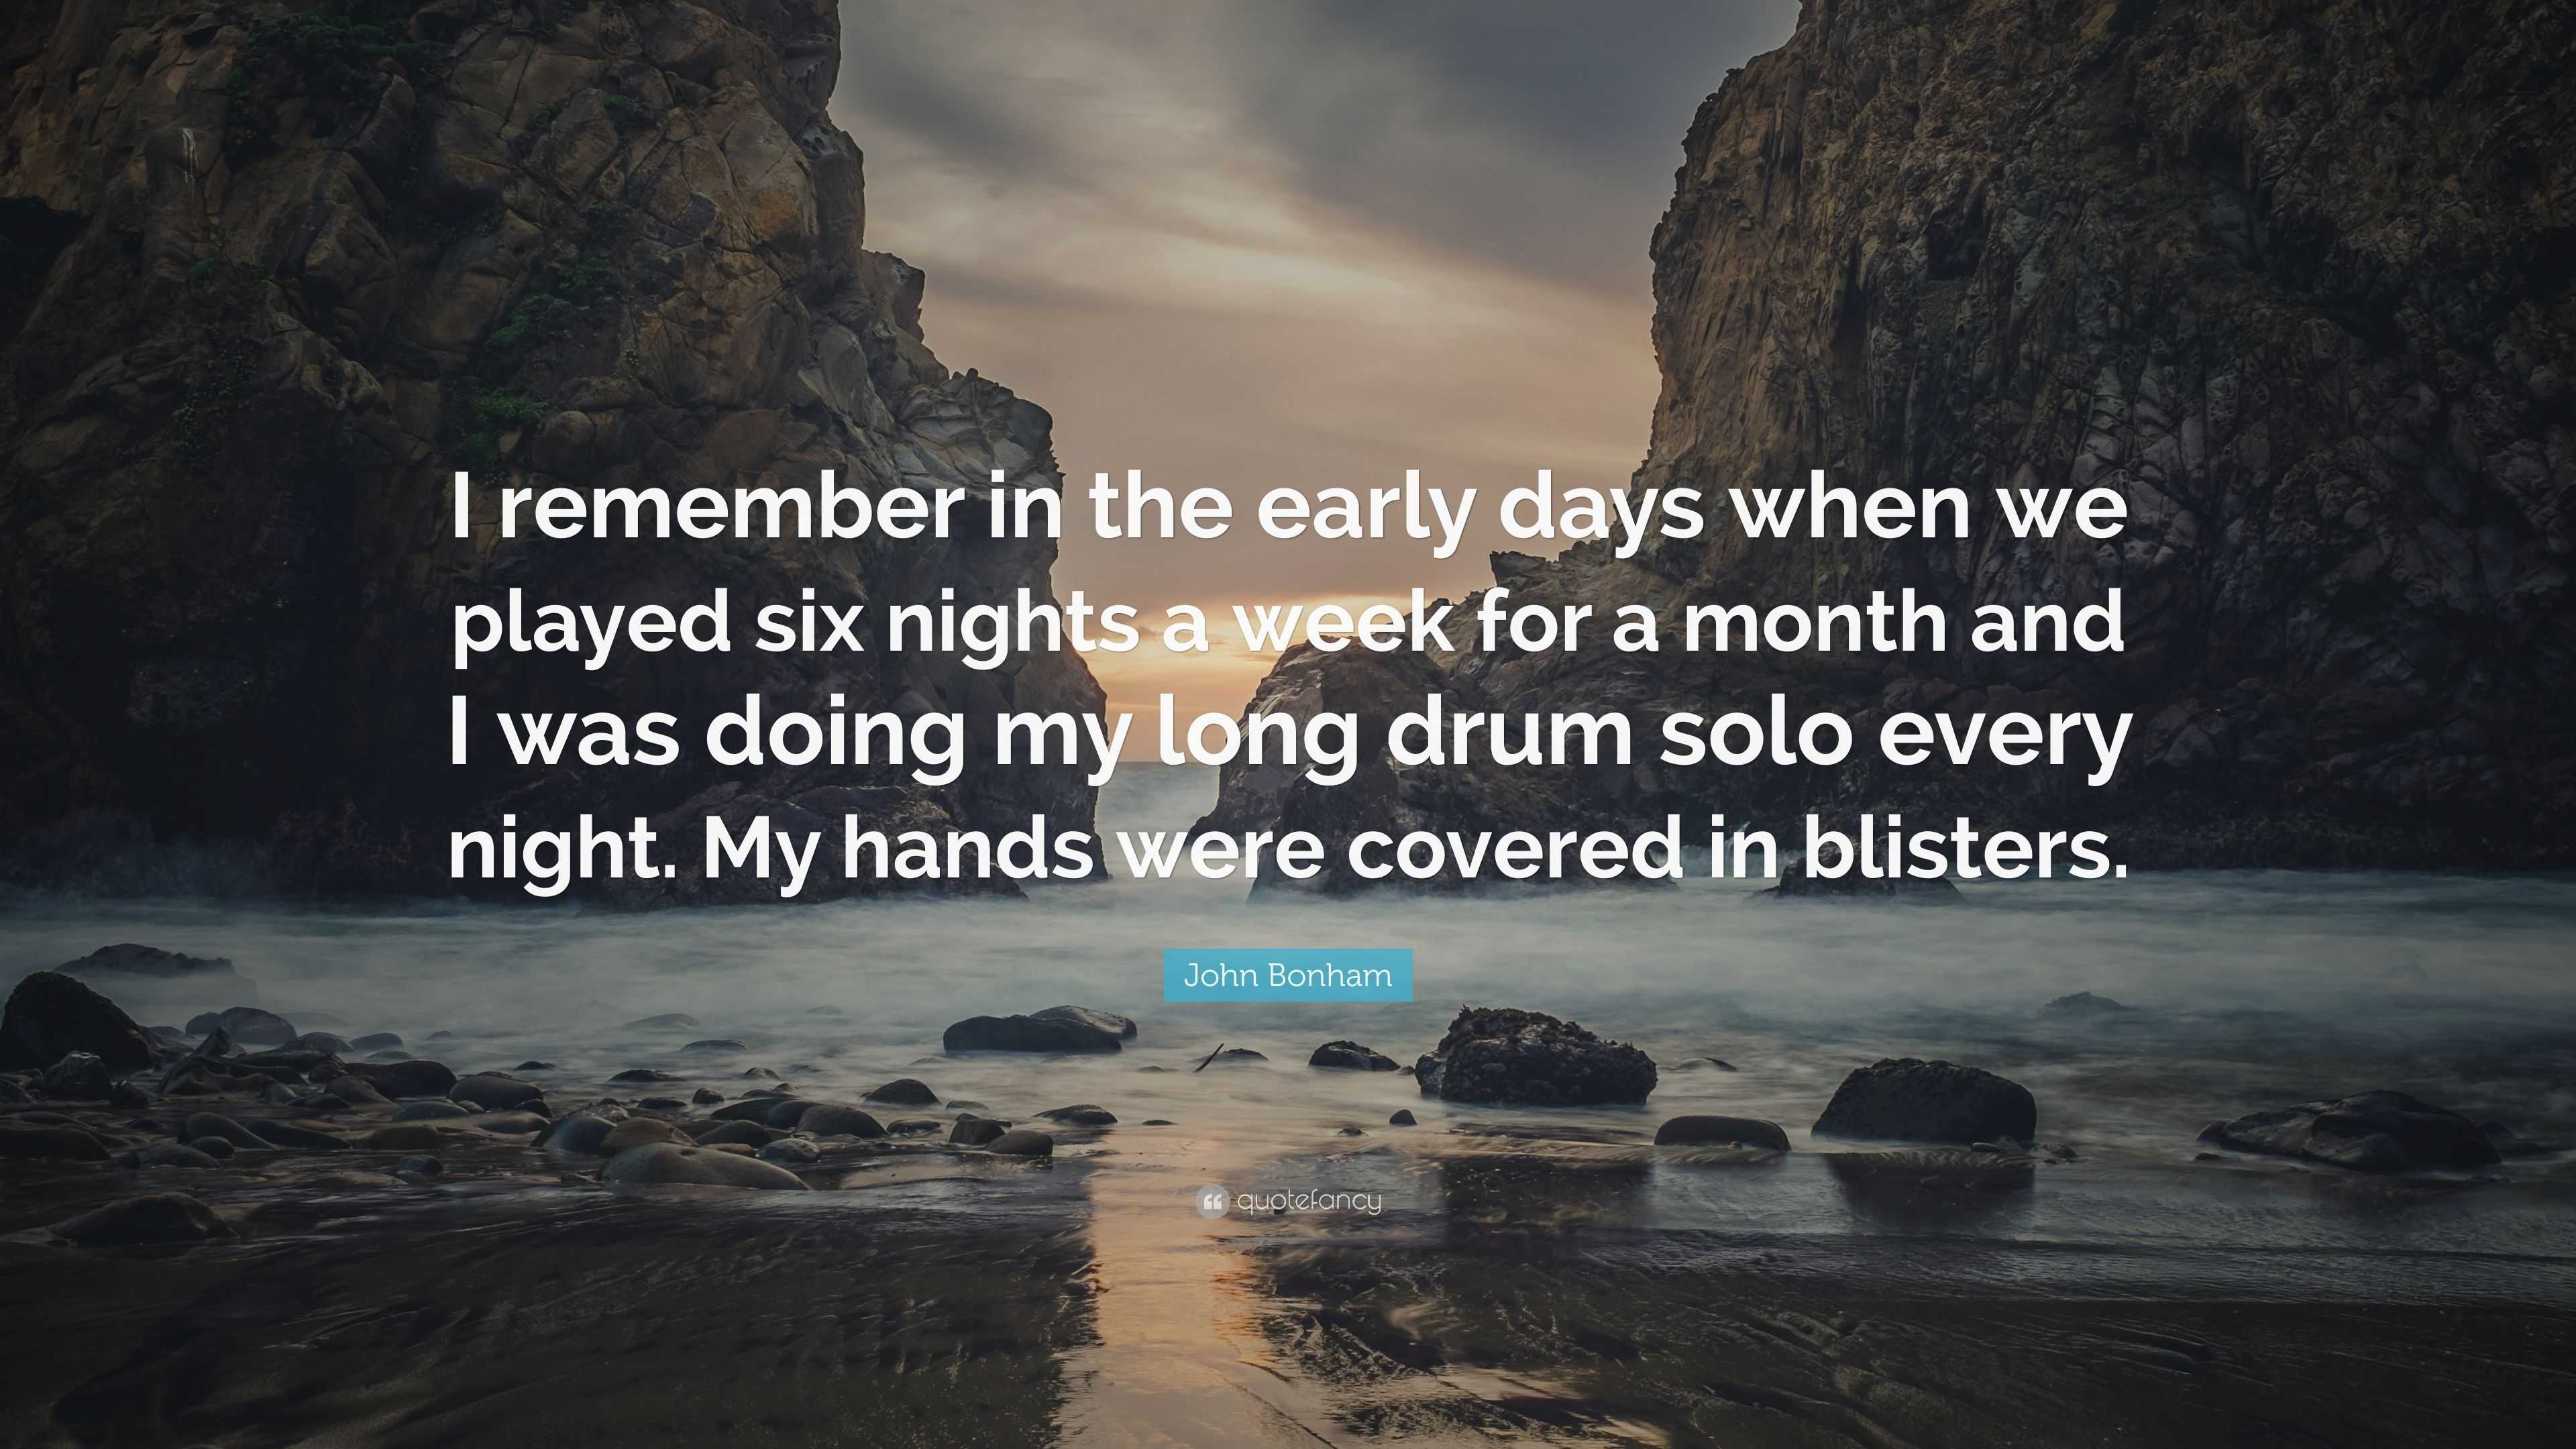 John Bonham Quote: "I remember in the early days when we played six nights a week for a month ...